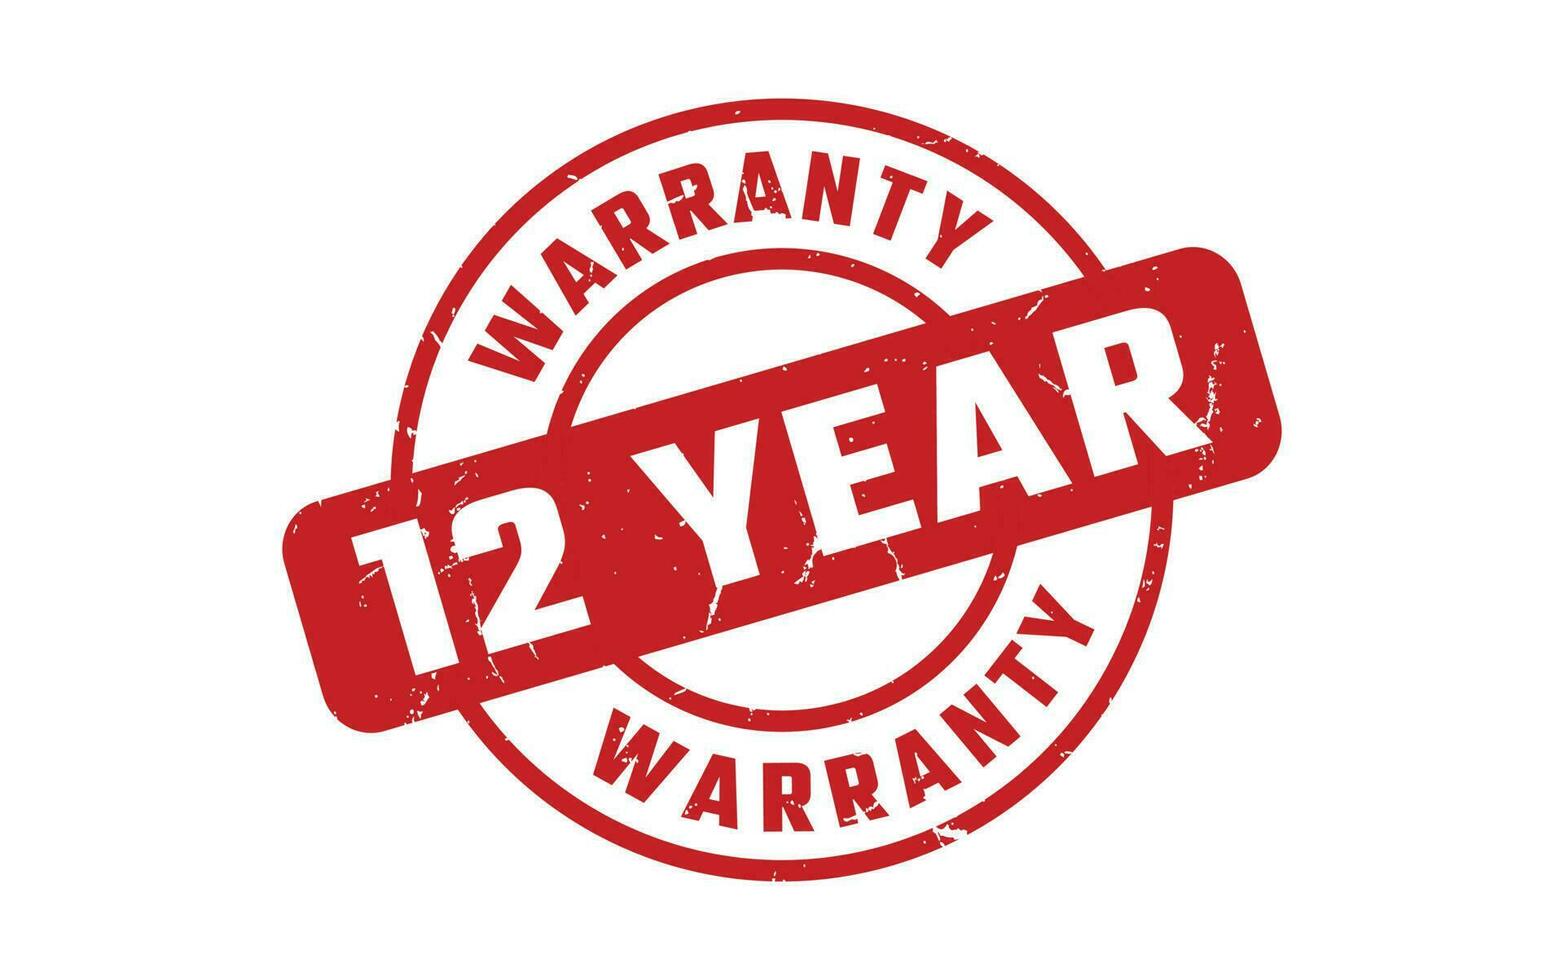 12 Year Warranty Rubber Stamp vector